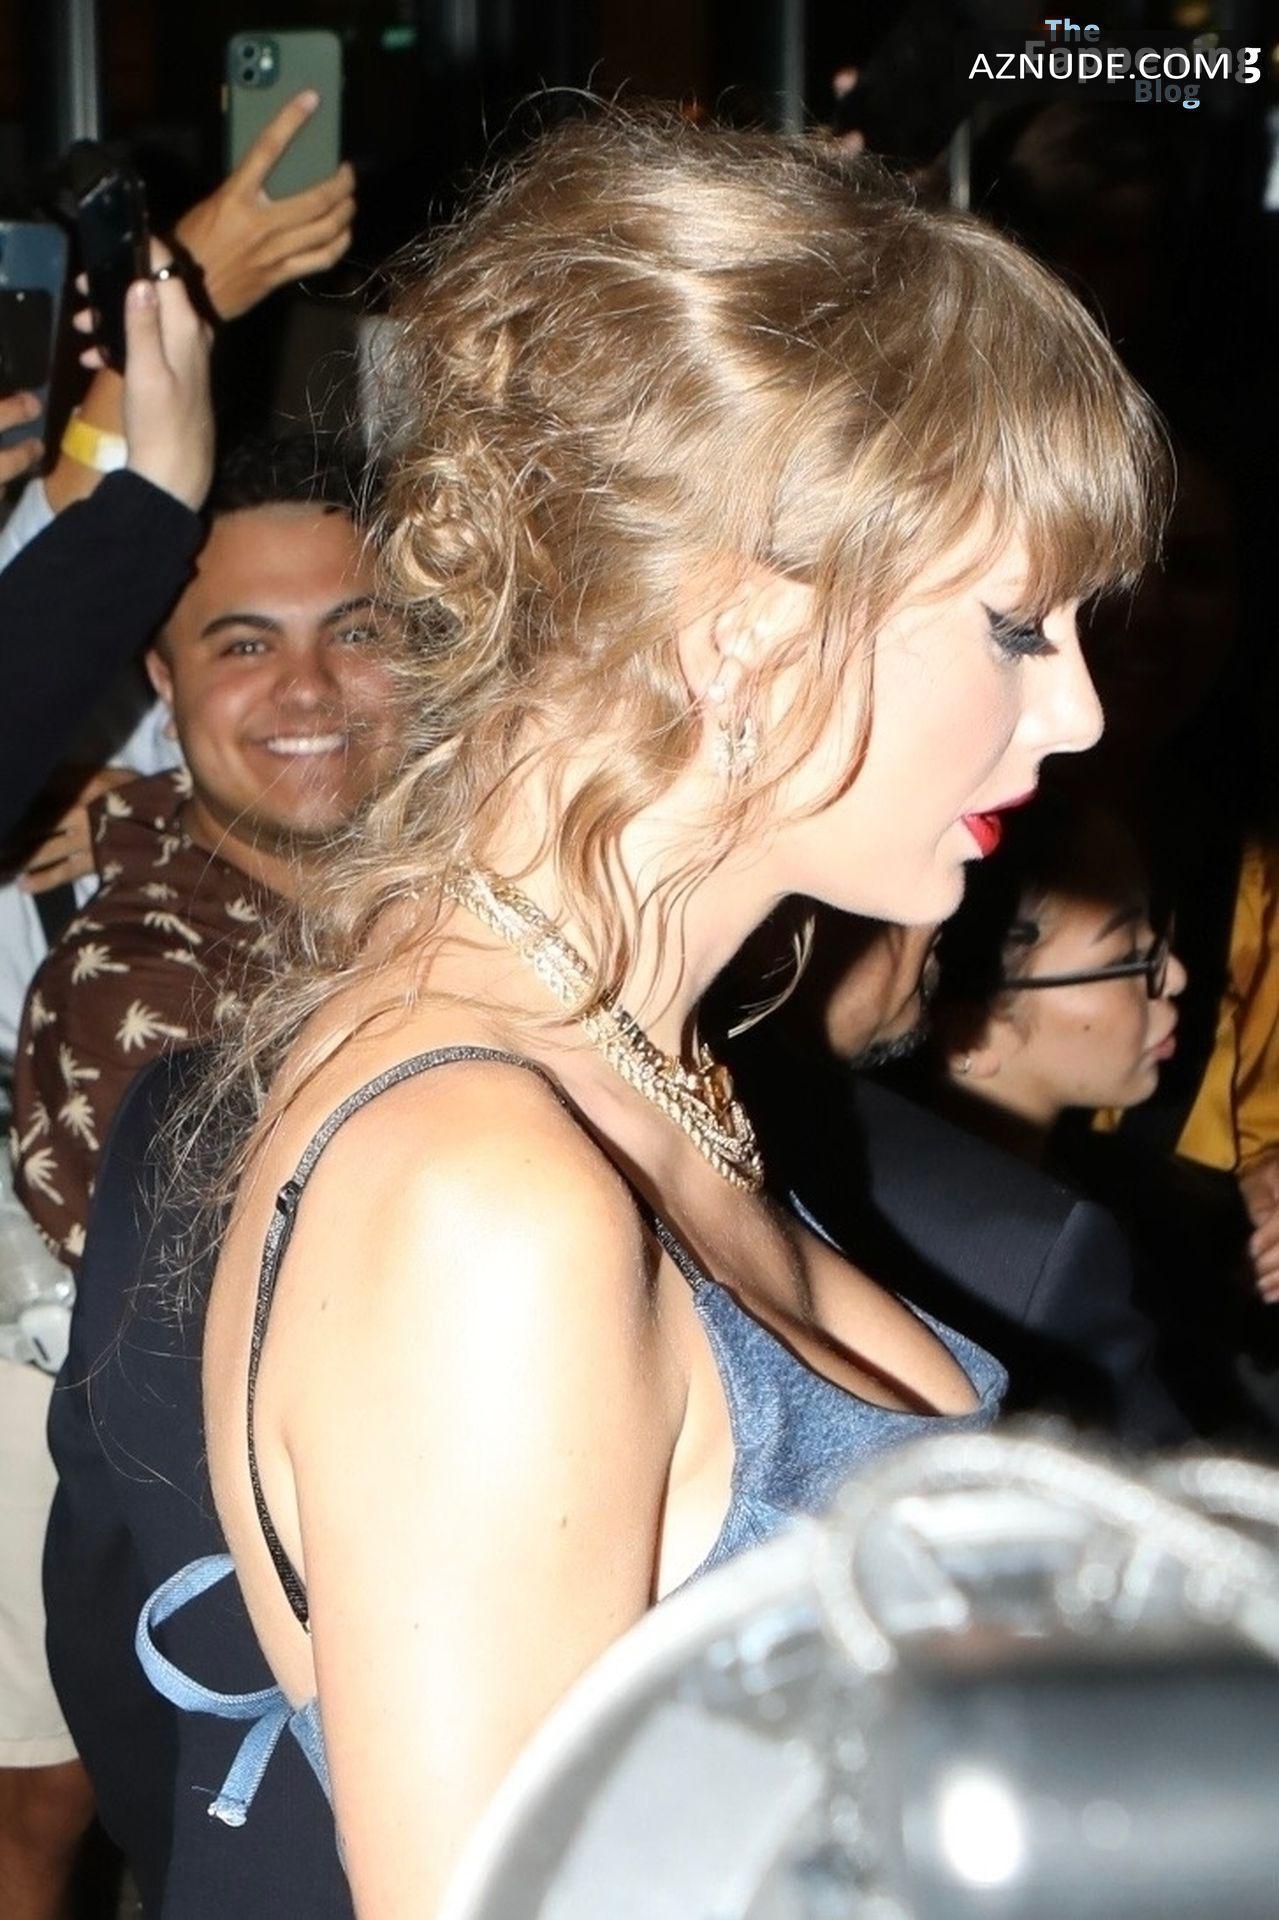 Taylor Swift Flaunts Her Sexy Legs And Cleavage At The Ned Nomad Mtv Vmas After Party Aznude